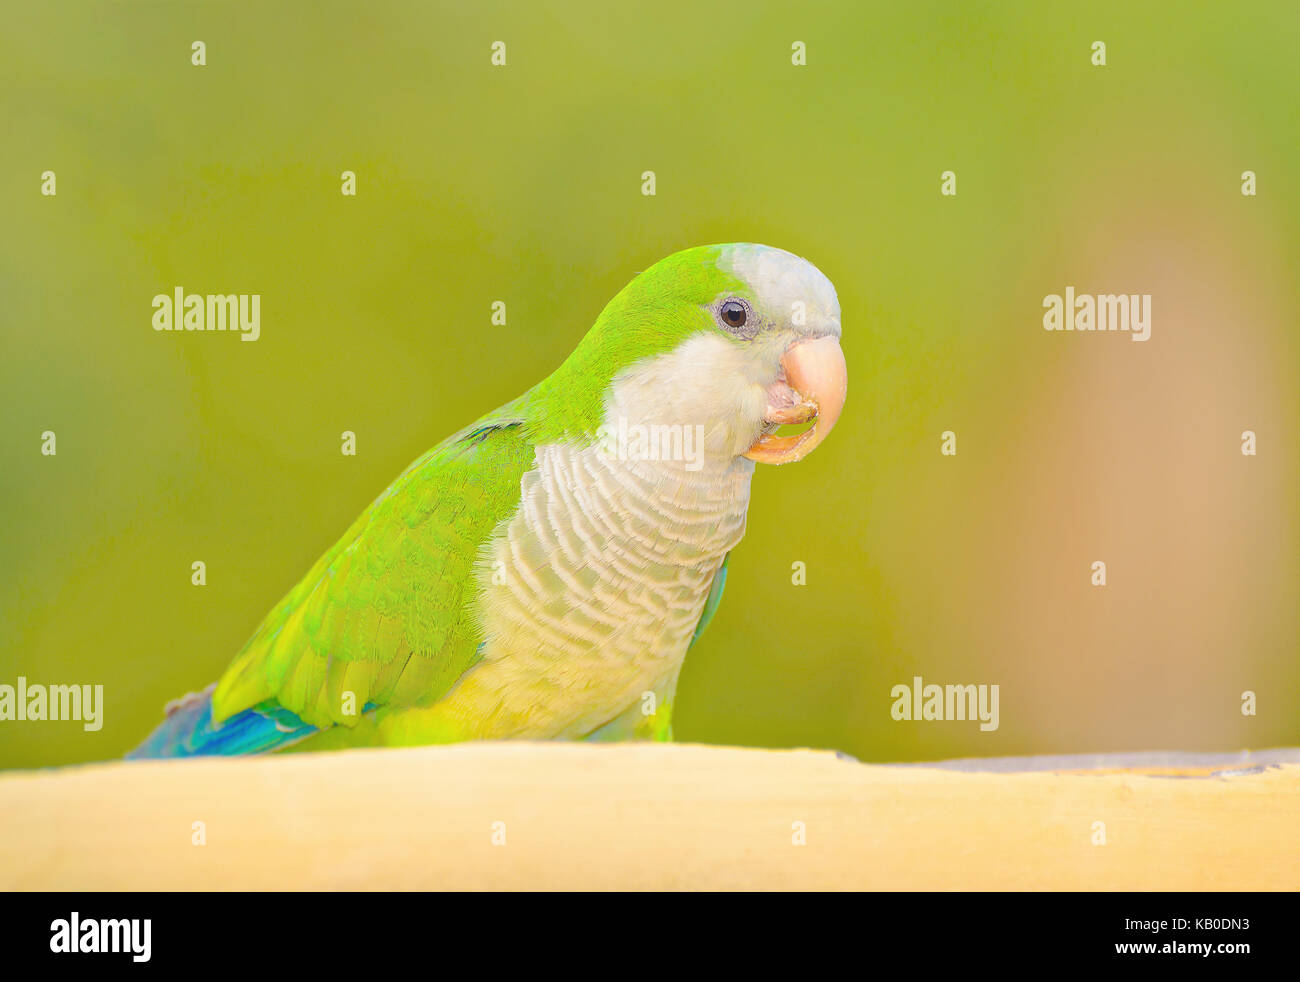 Green parakeet known as Caturrita in Brazil. Bird with a long curved deformed beak, green feathers, white belly, orange beak and some vibrant blue fea Stock Photo